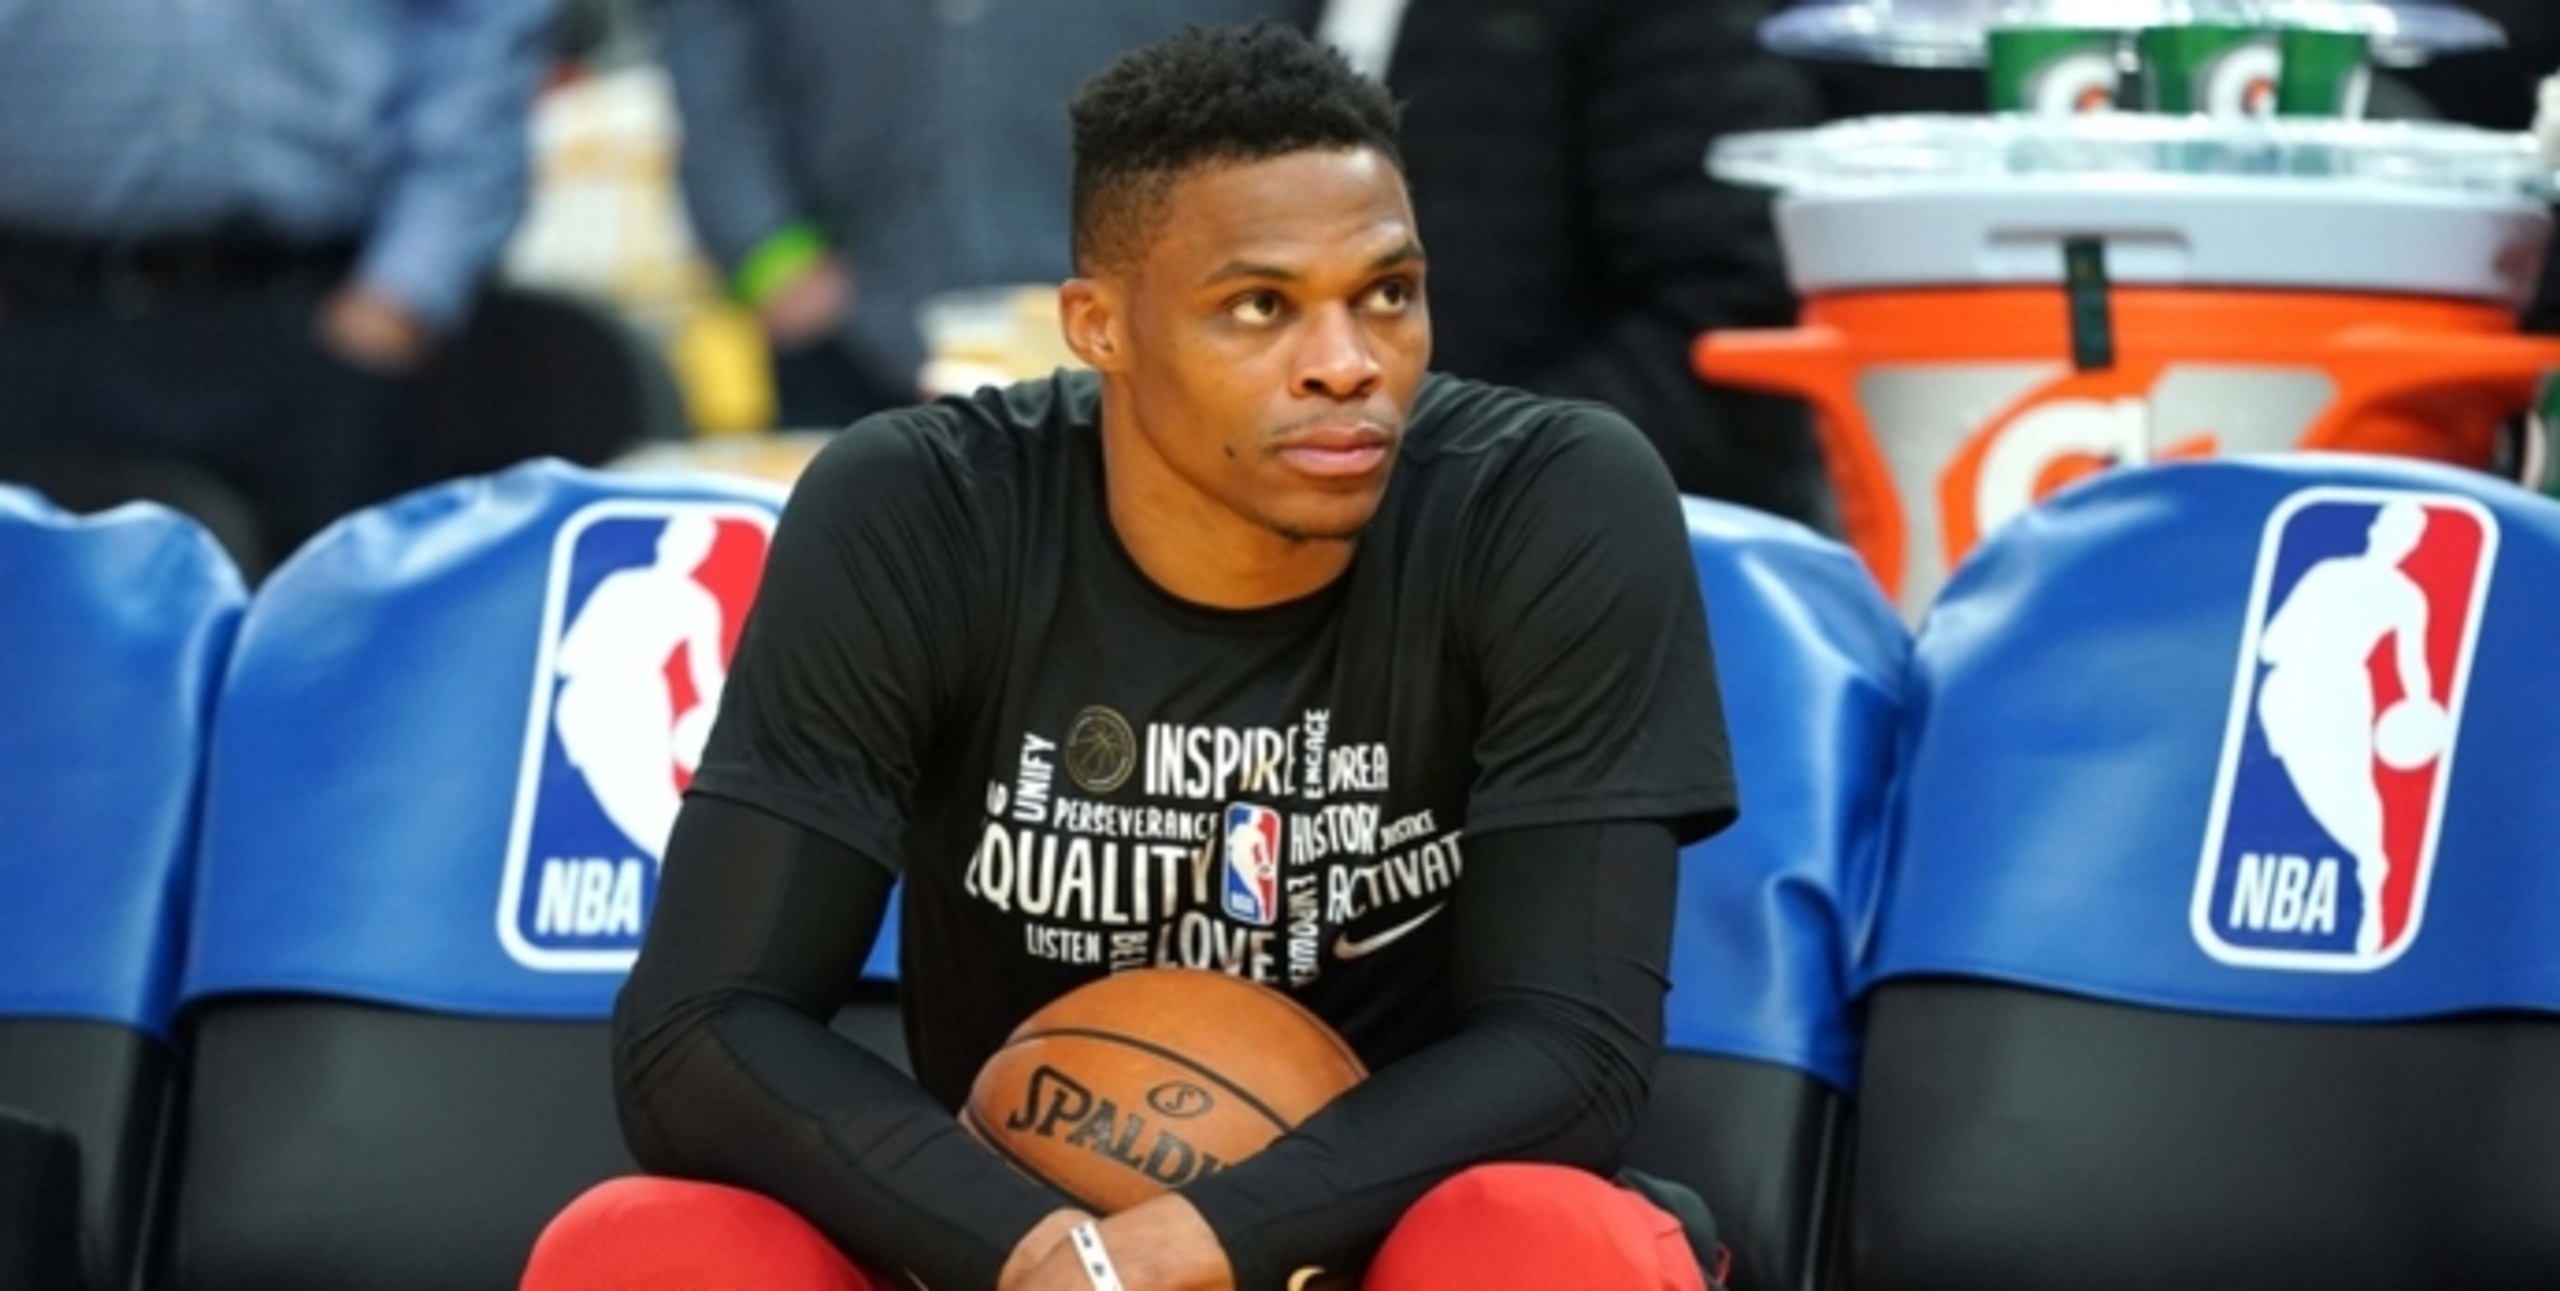 Russell Westbrook, Scott Brooks excited to reunite on Wizards